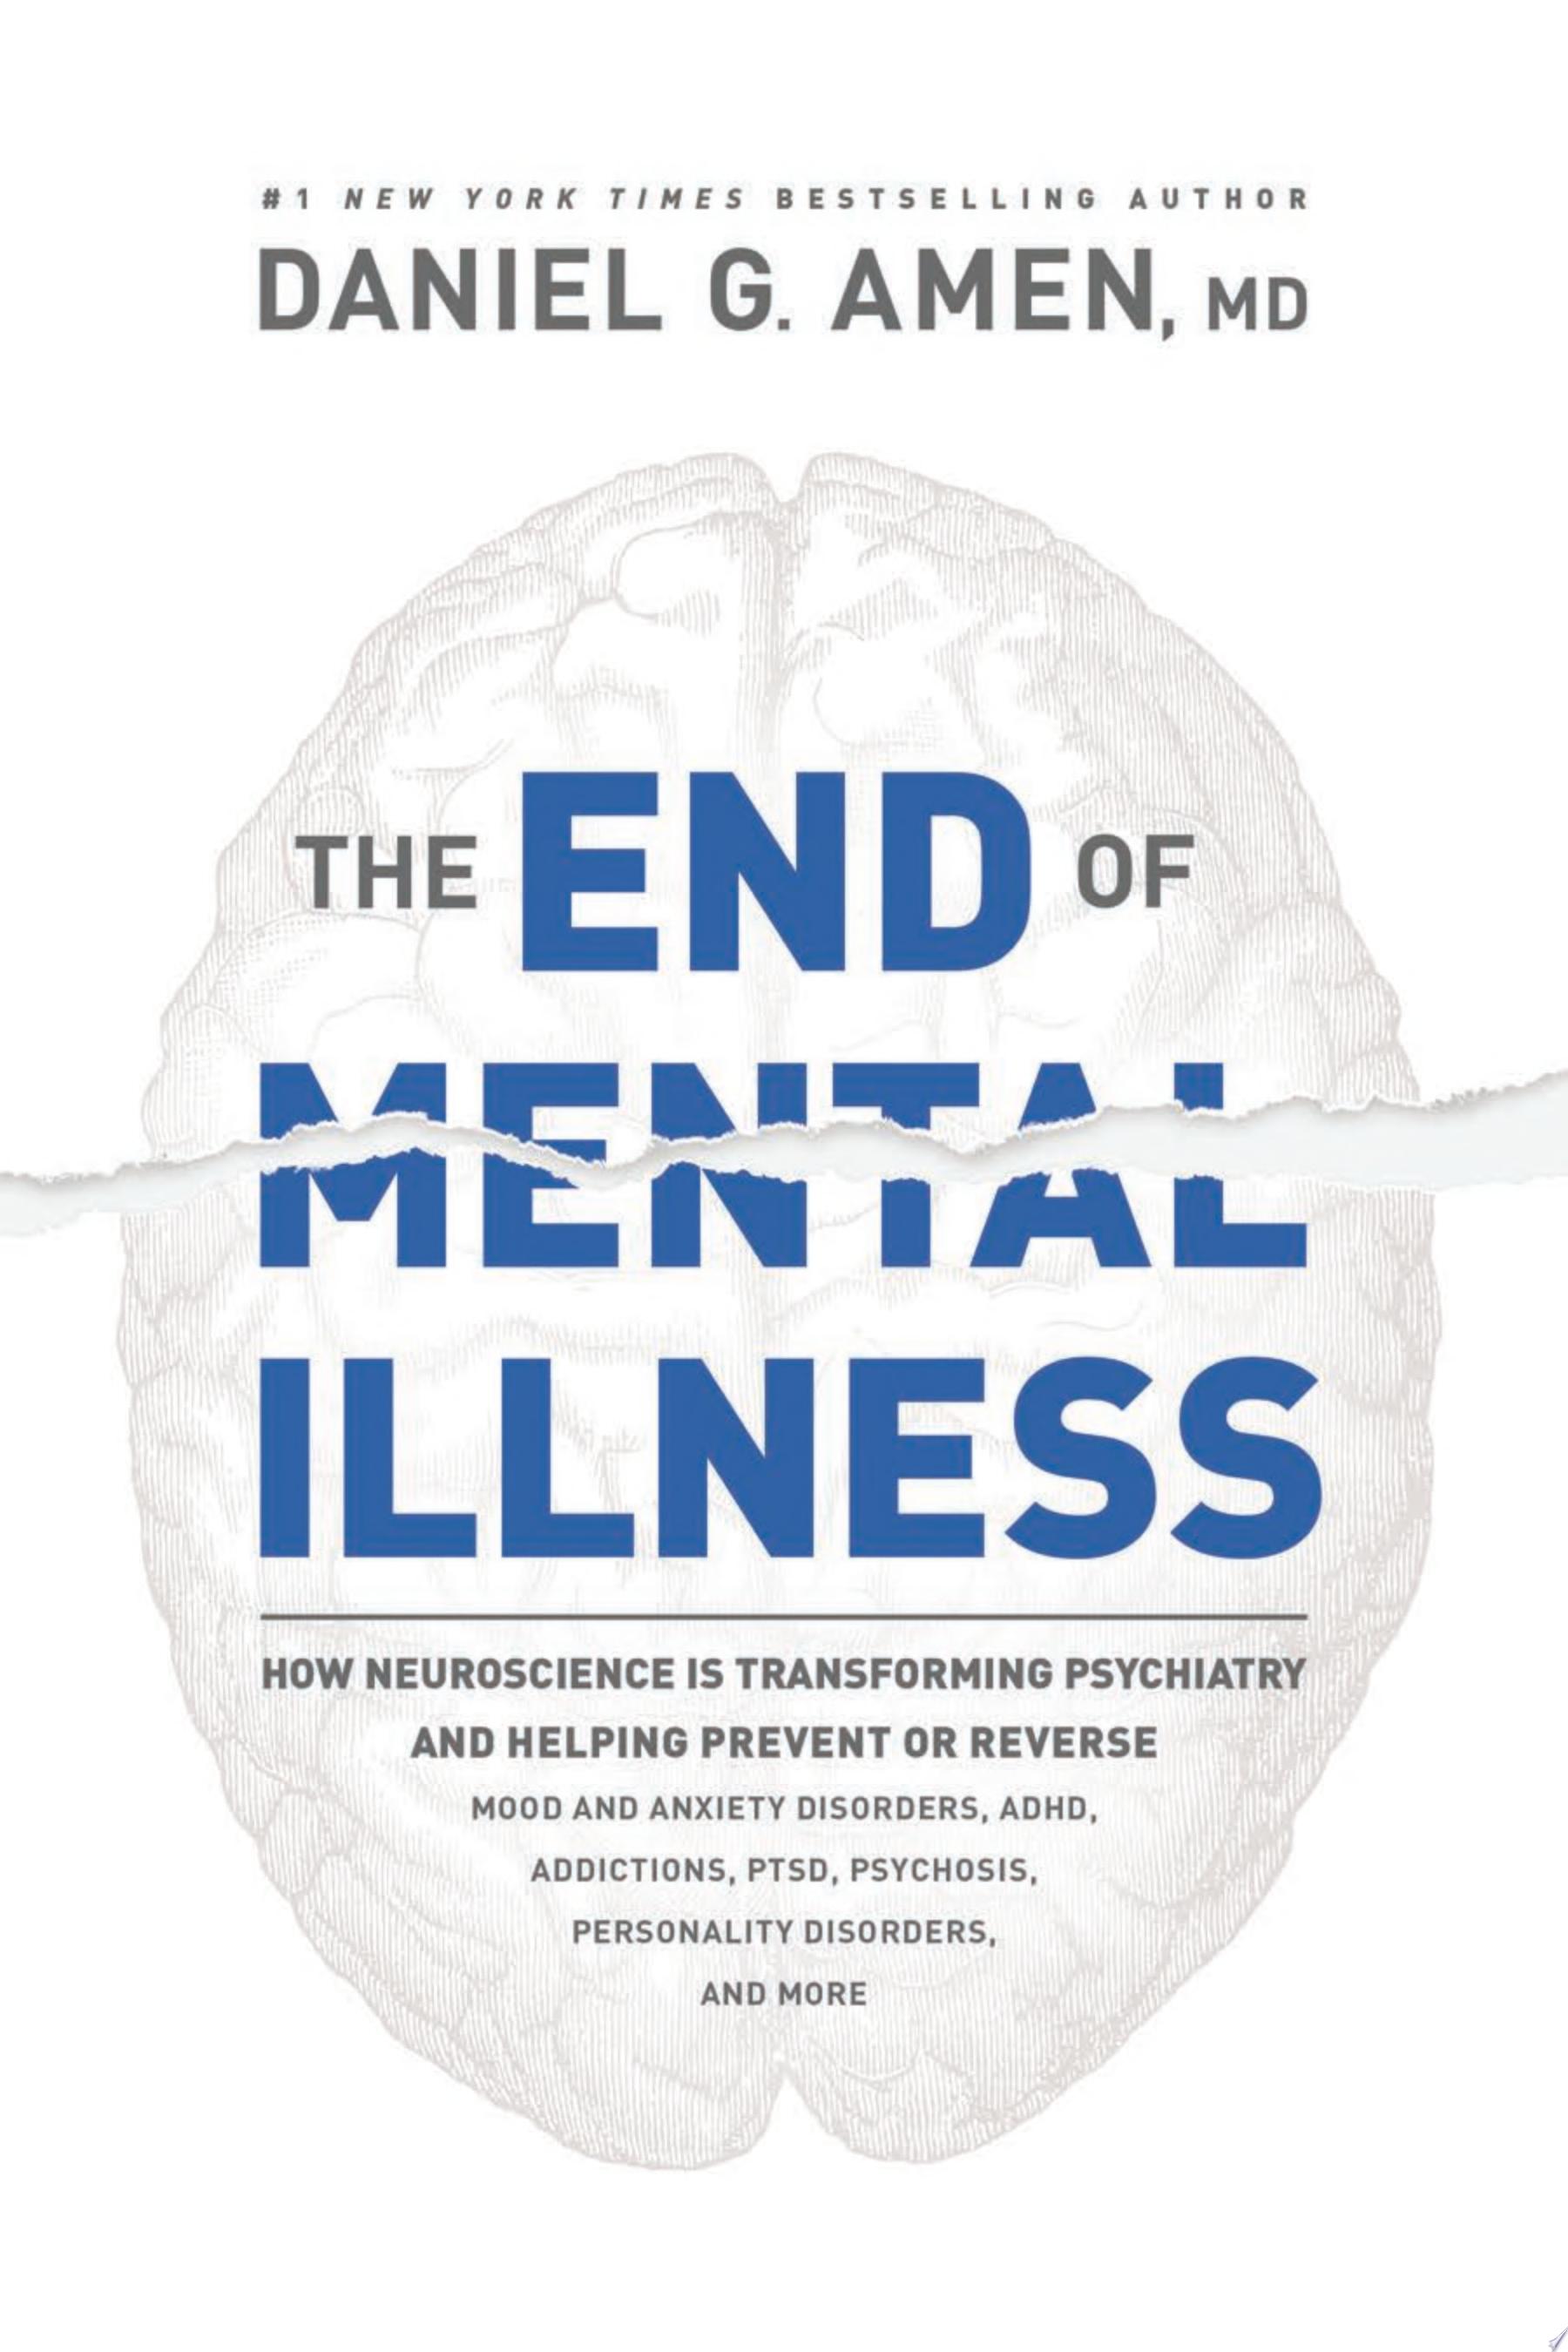 Image for "The End of Mental Illness"